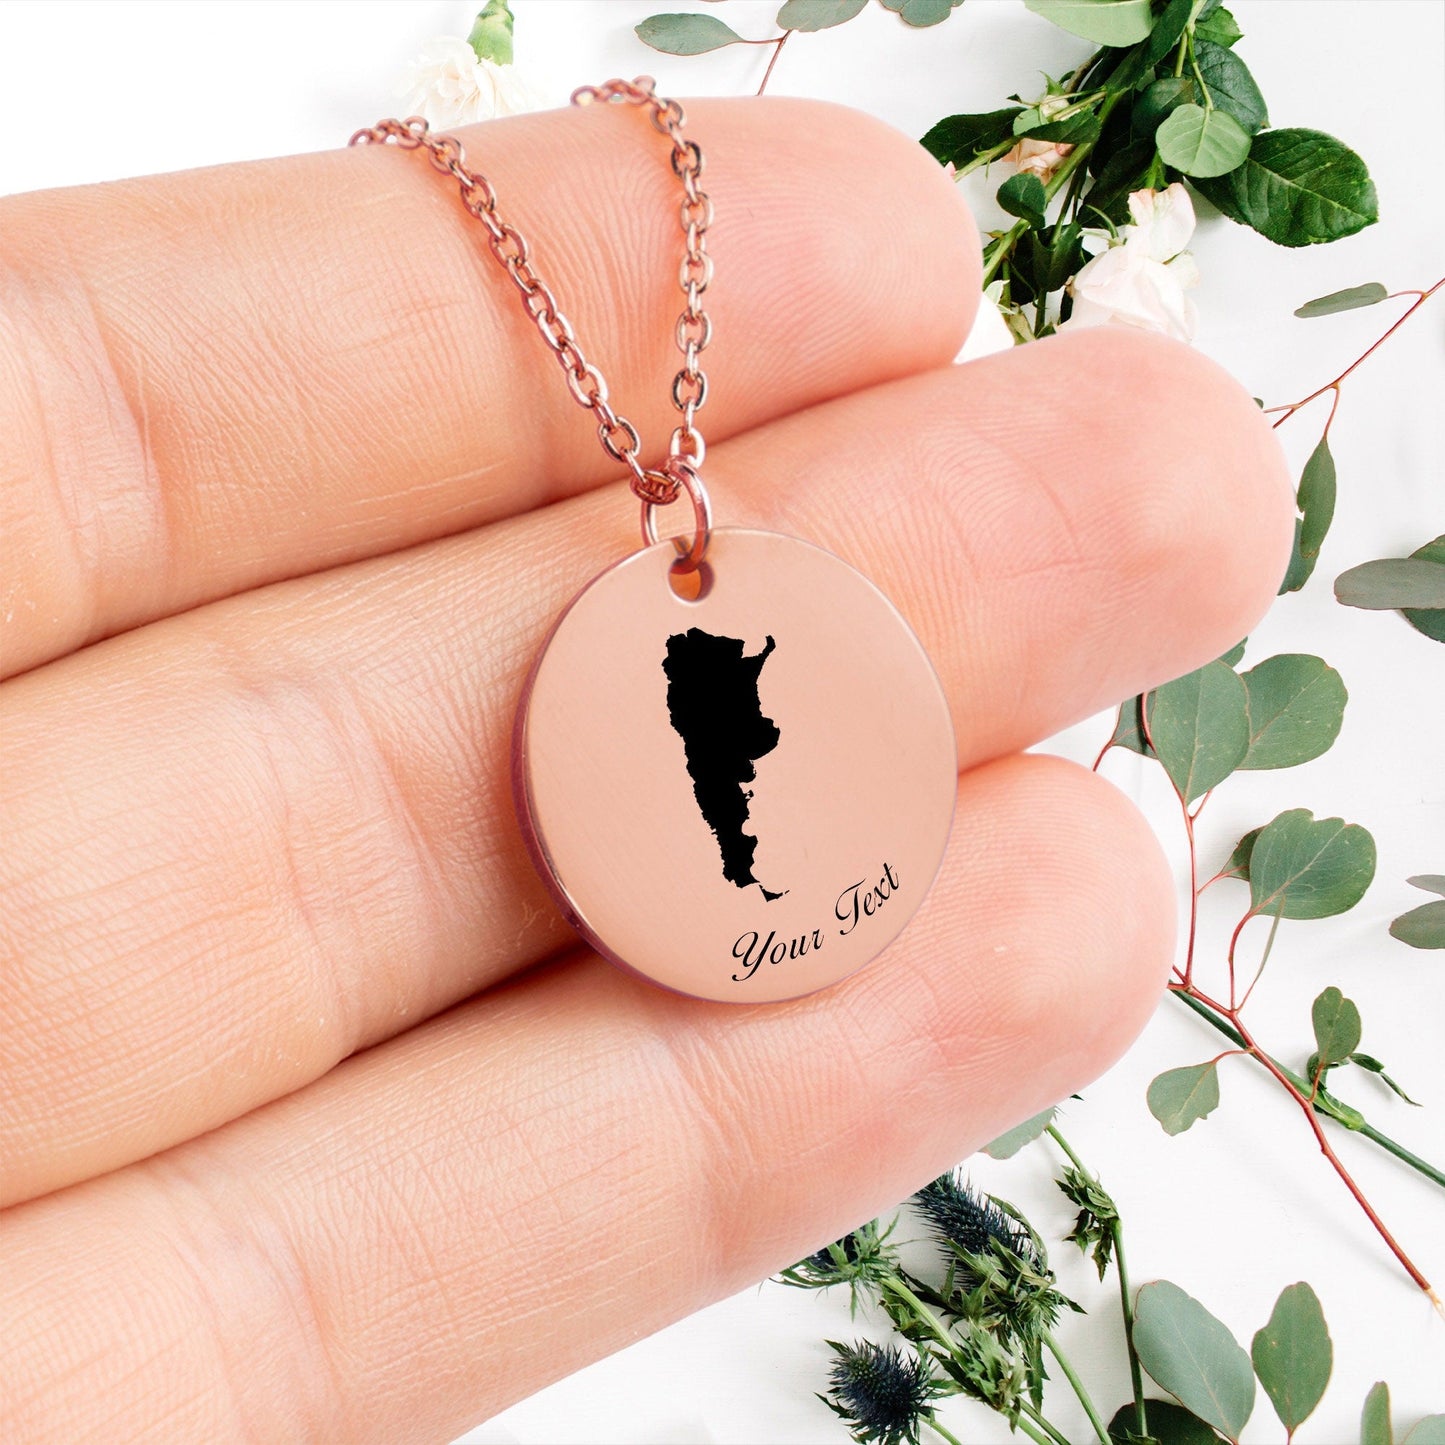 Argentina Country Map Necklace, Your Name Necklace, Minimalist Necklace, Personalized Gift, Silver Necklace, Gift For Him Her